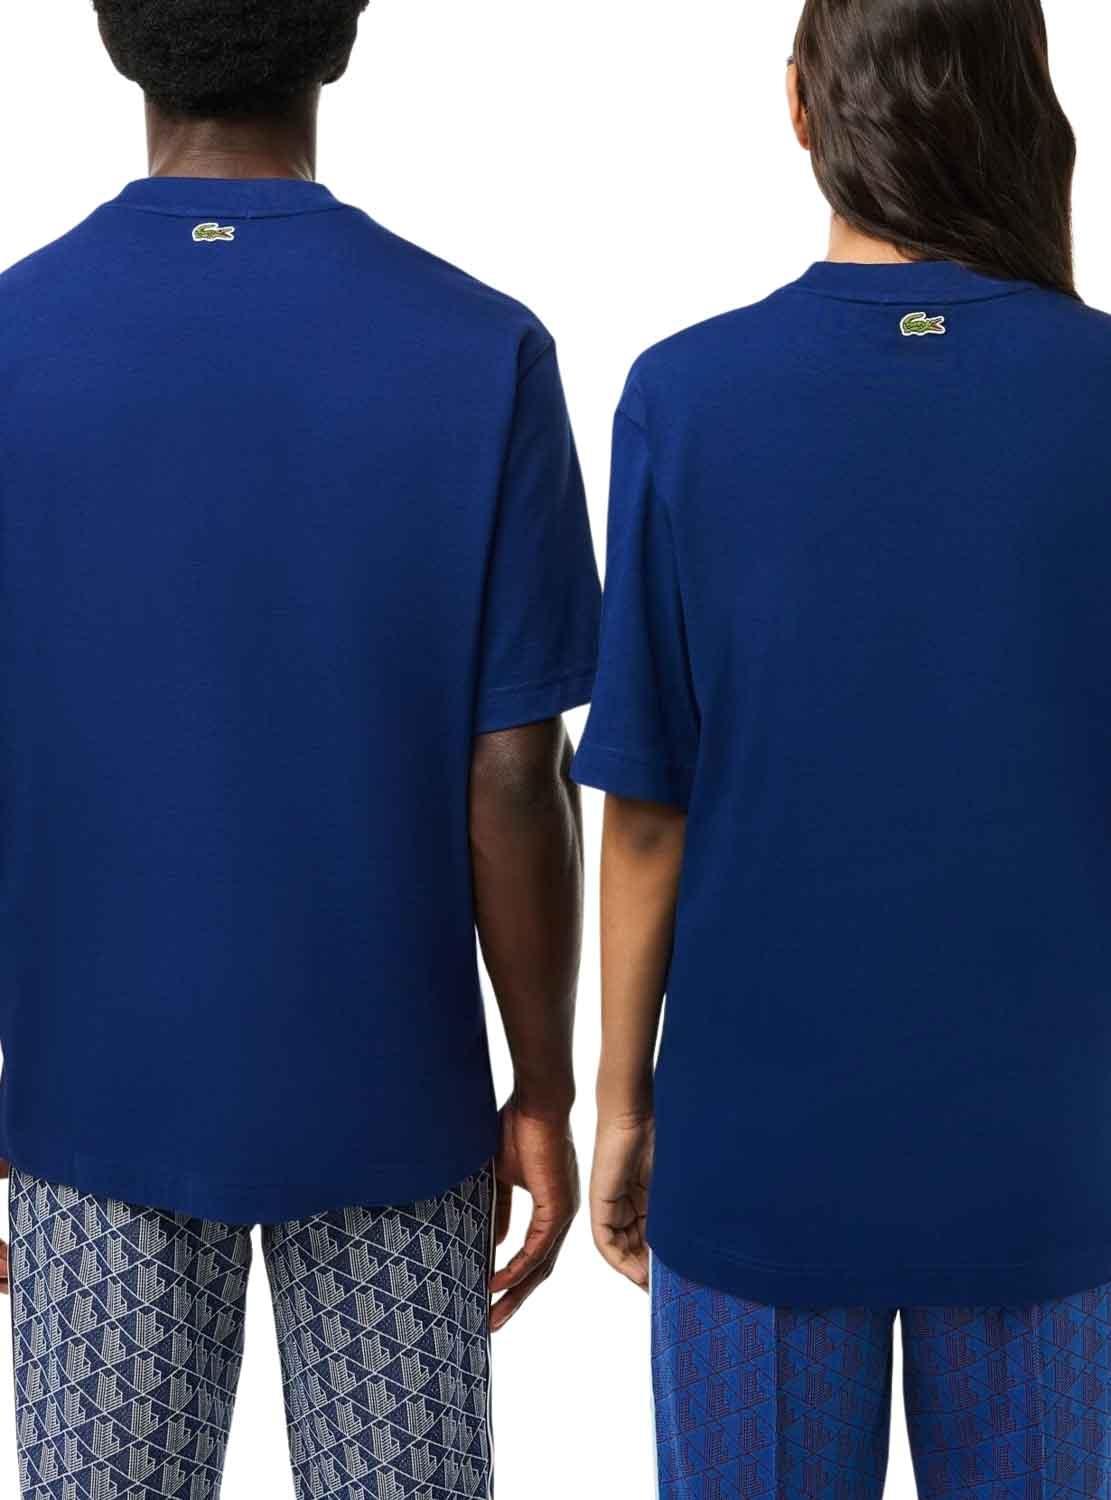 T-Shirt Lacoste Loose Fit Blu Royal Uomo Donna